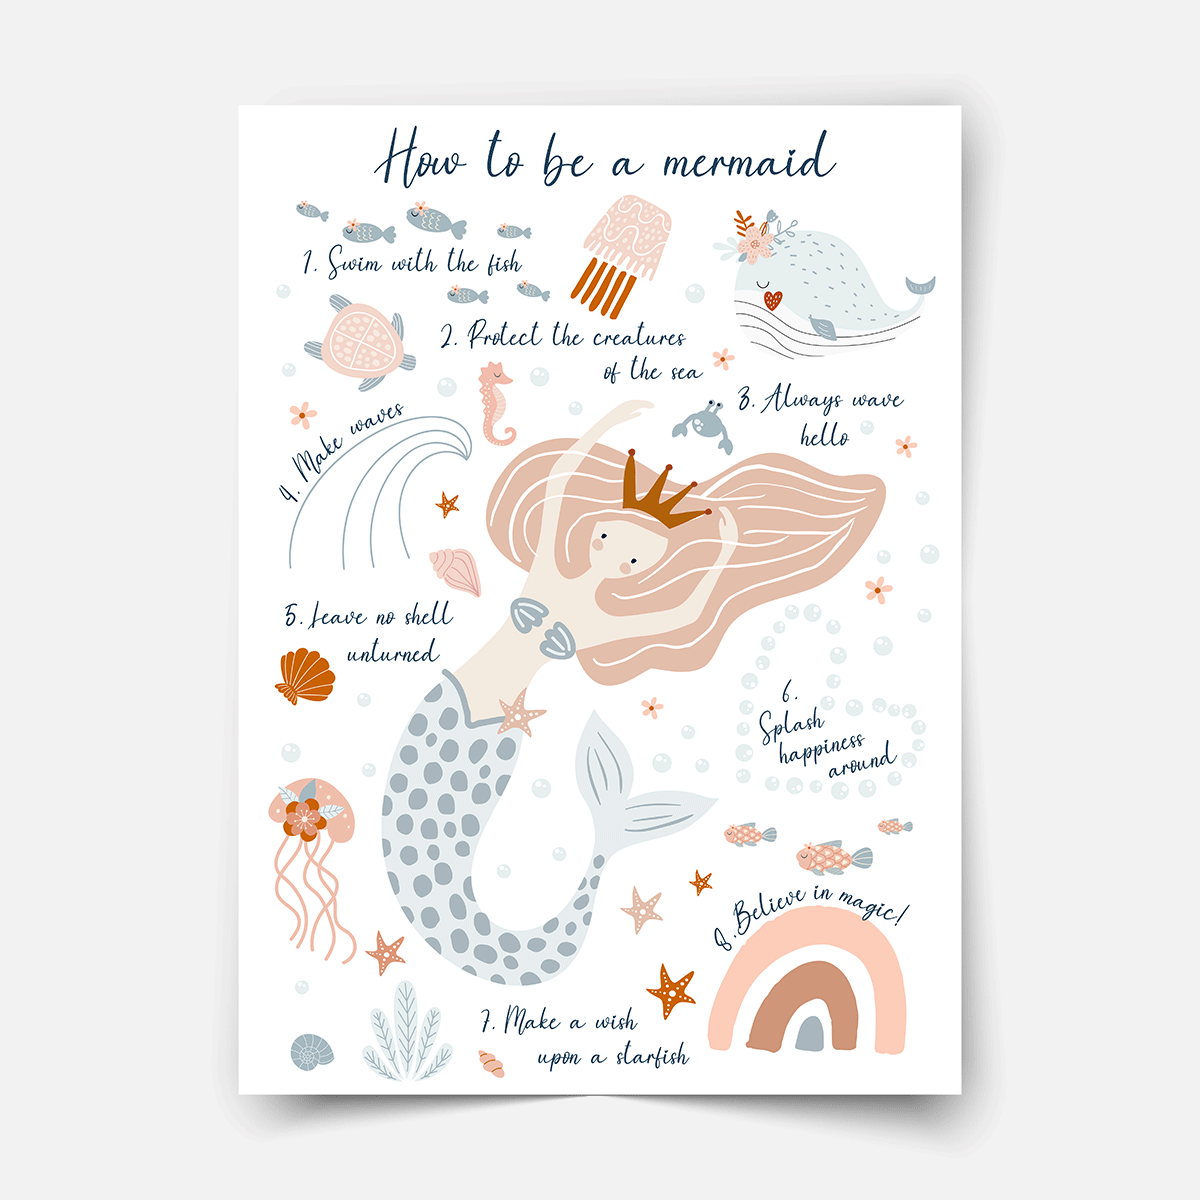 How to be a mermaid (Boho) - Poster